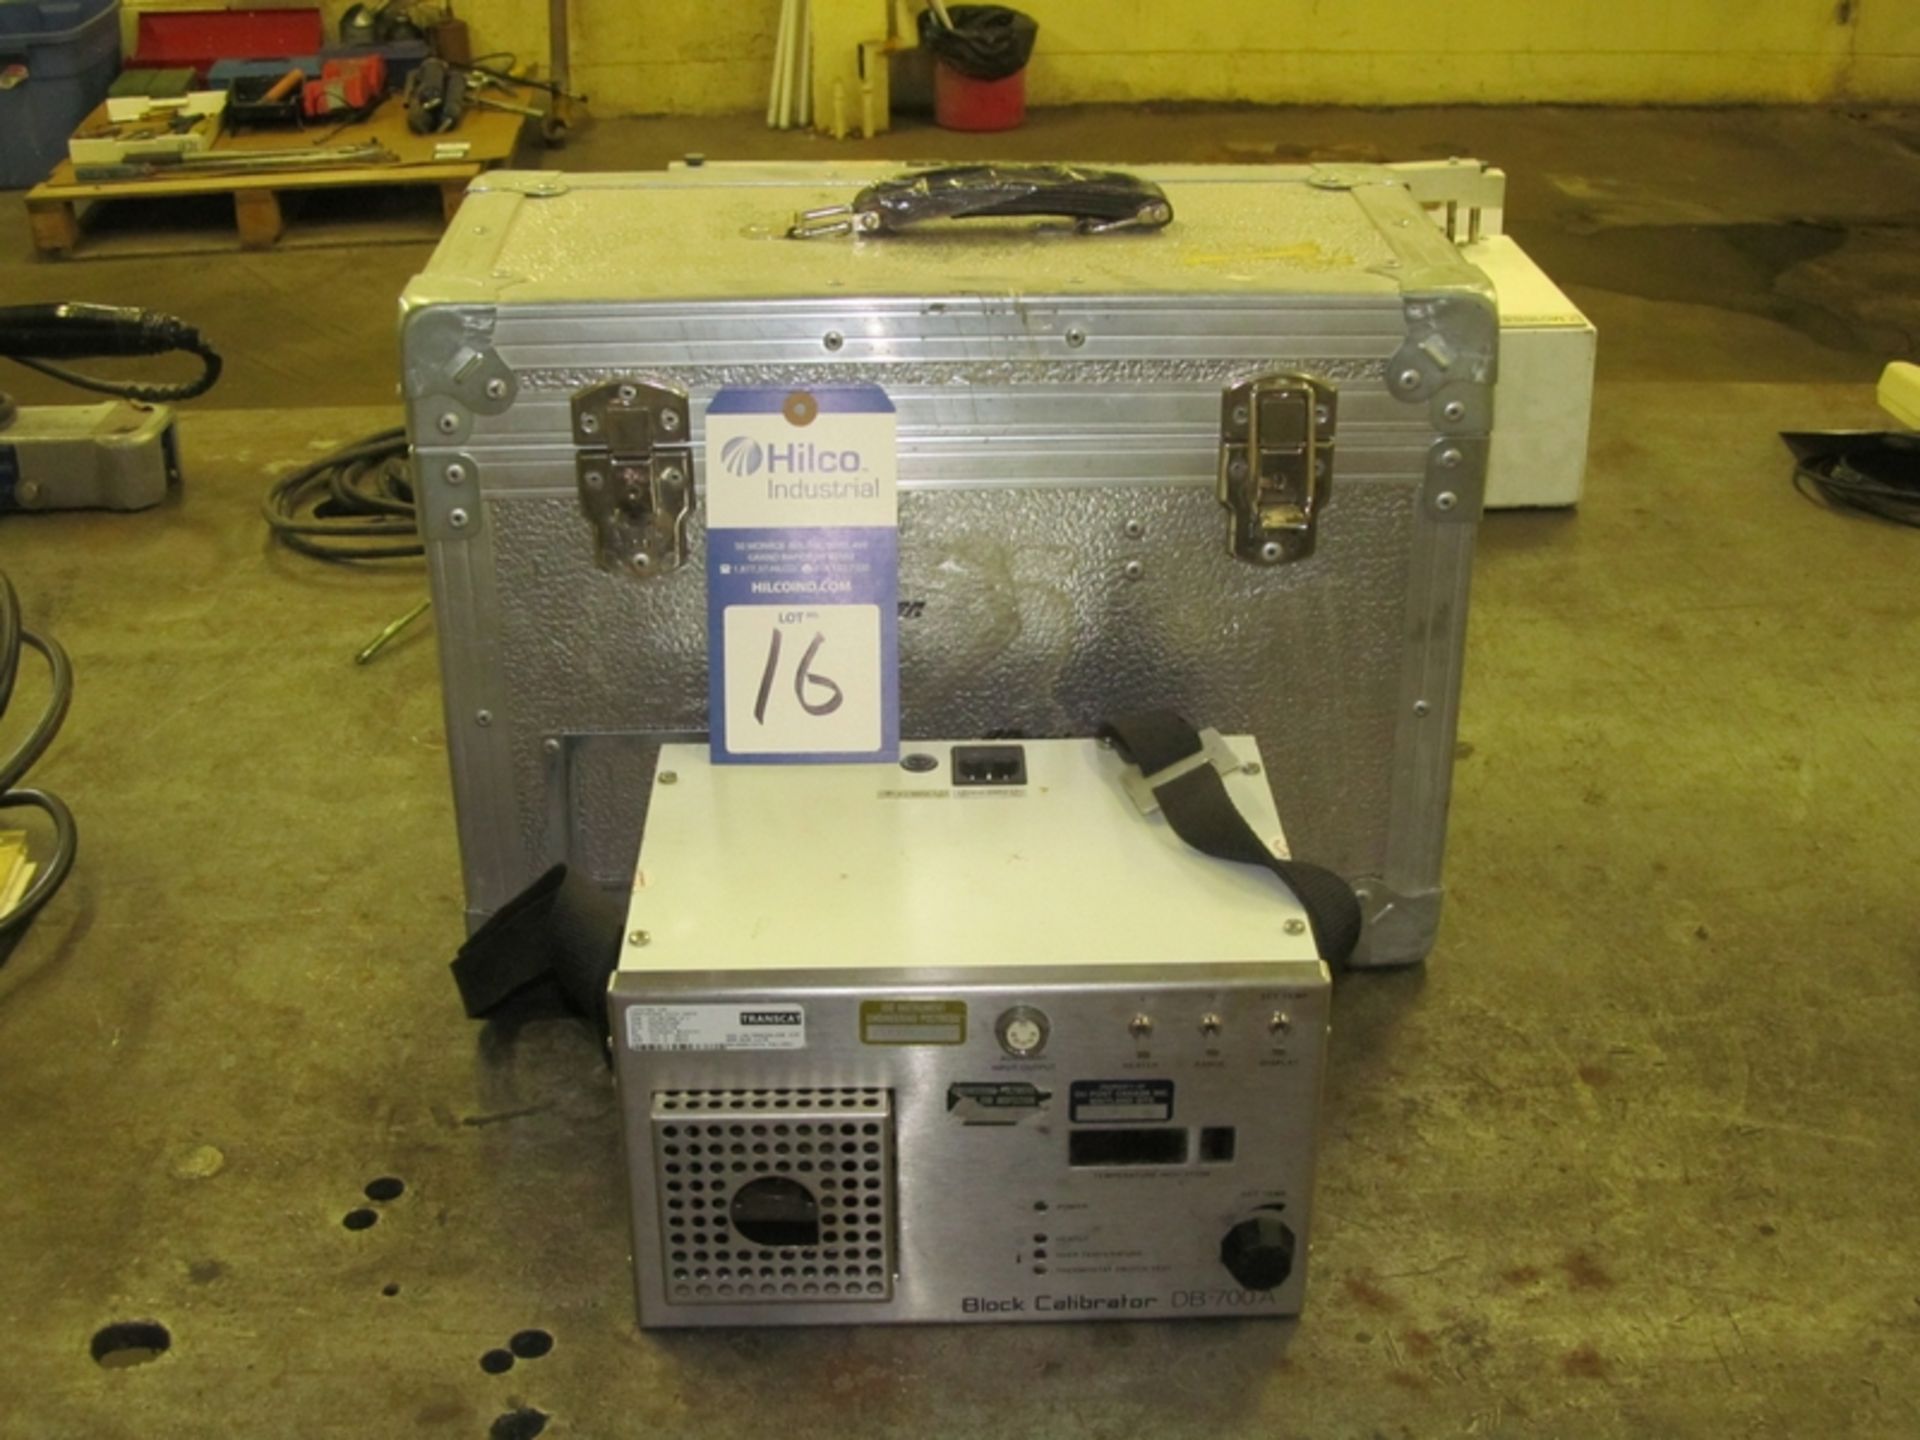 Techne Model DB-700A Thermocouple & RTD Calibrator; Serial Number: 27510/18; 110 Volt